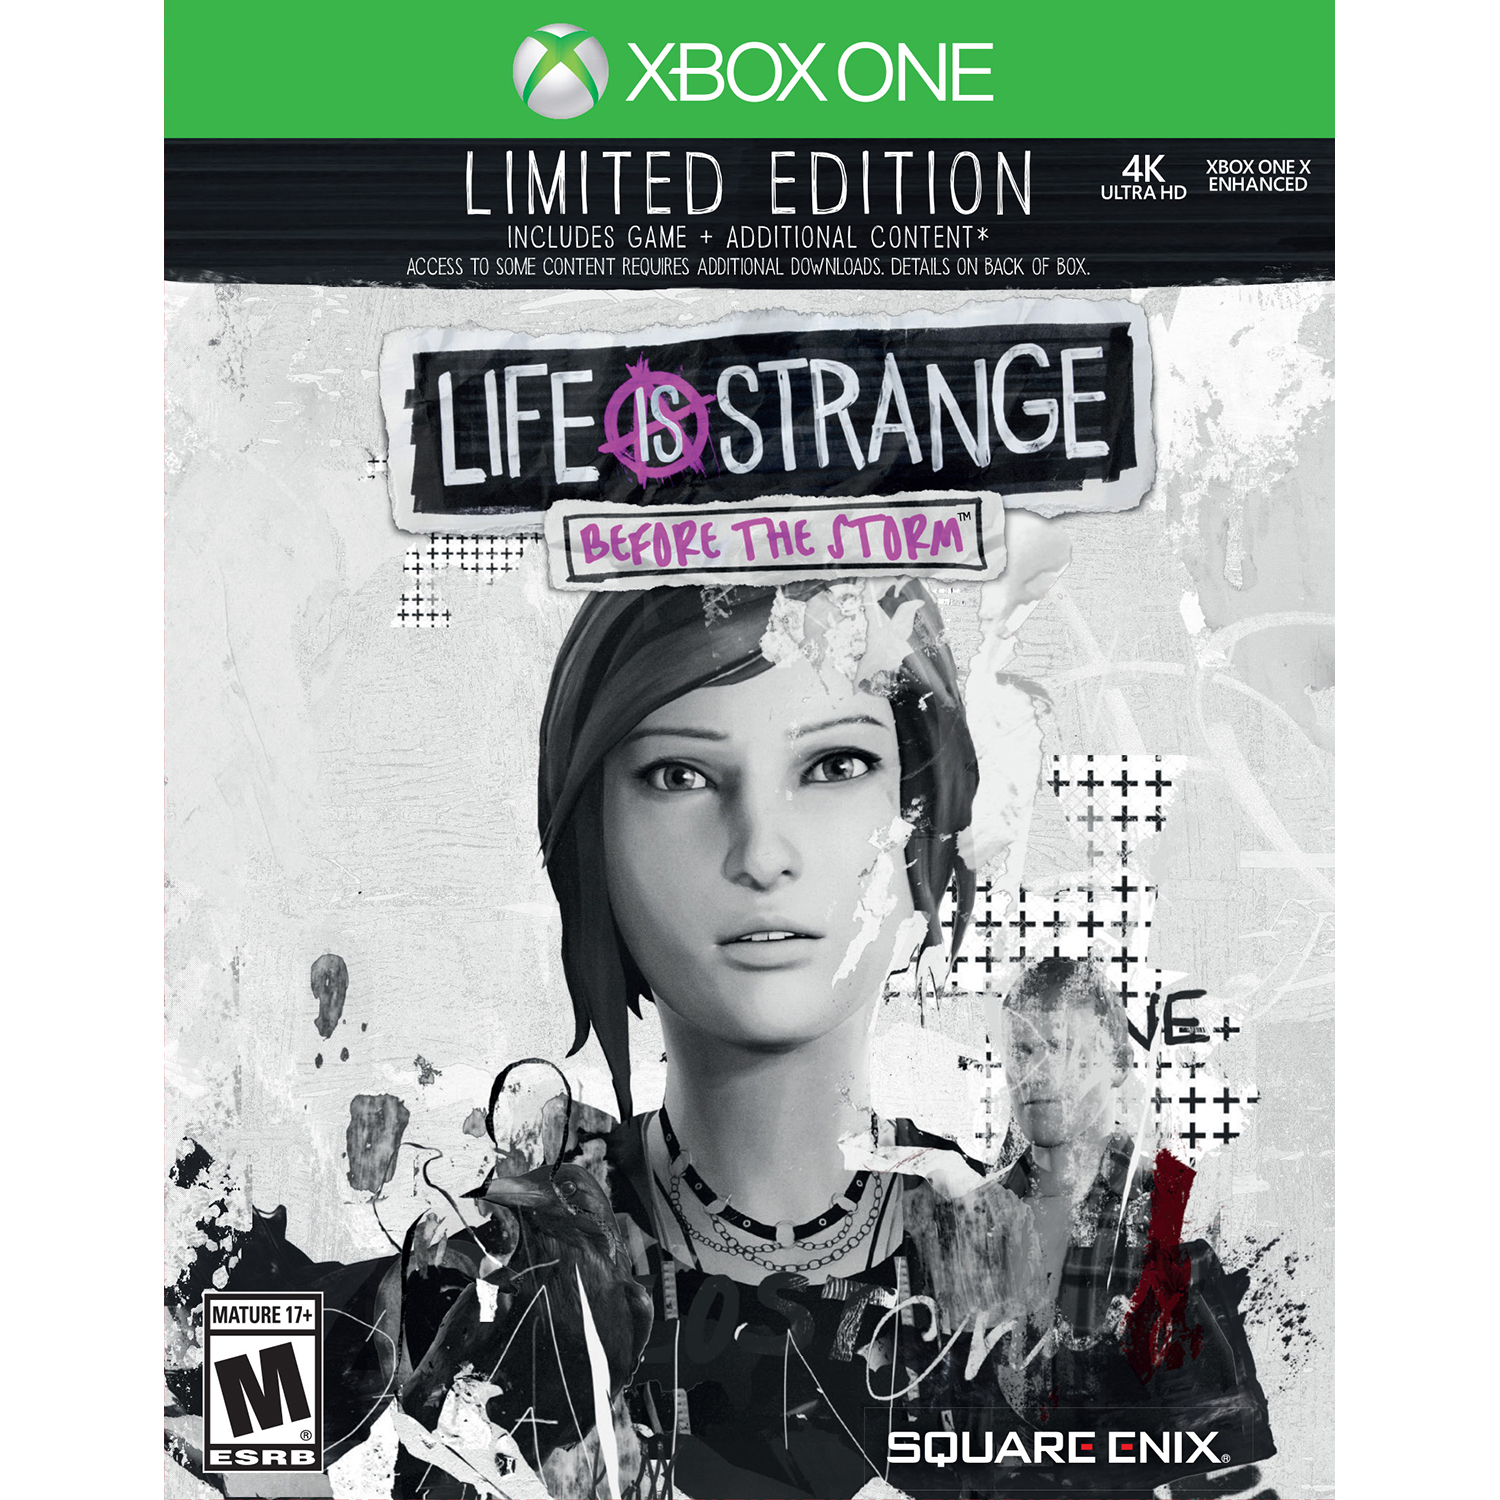 Life is Strange: Before the Storm Limited Edition, Square Enix, Xbox One, [Physical], 662248920689 - image 1 of 1